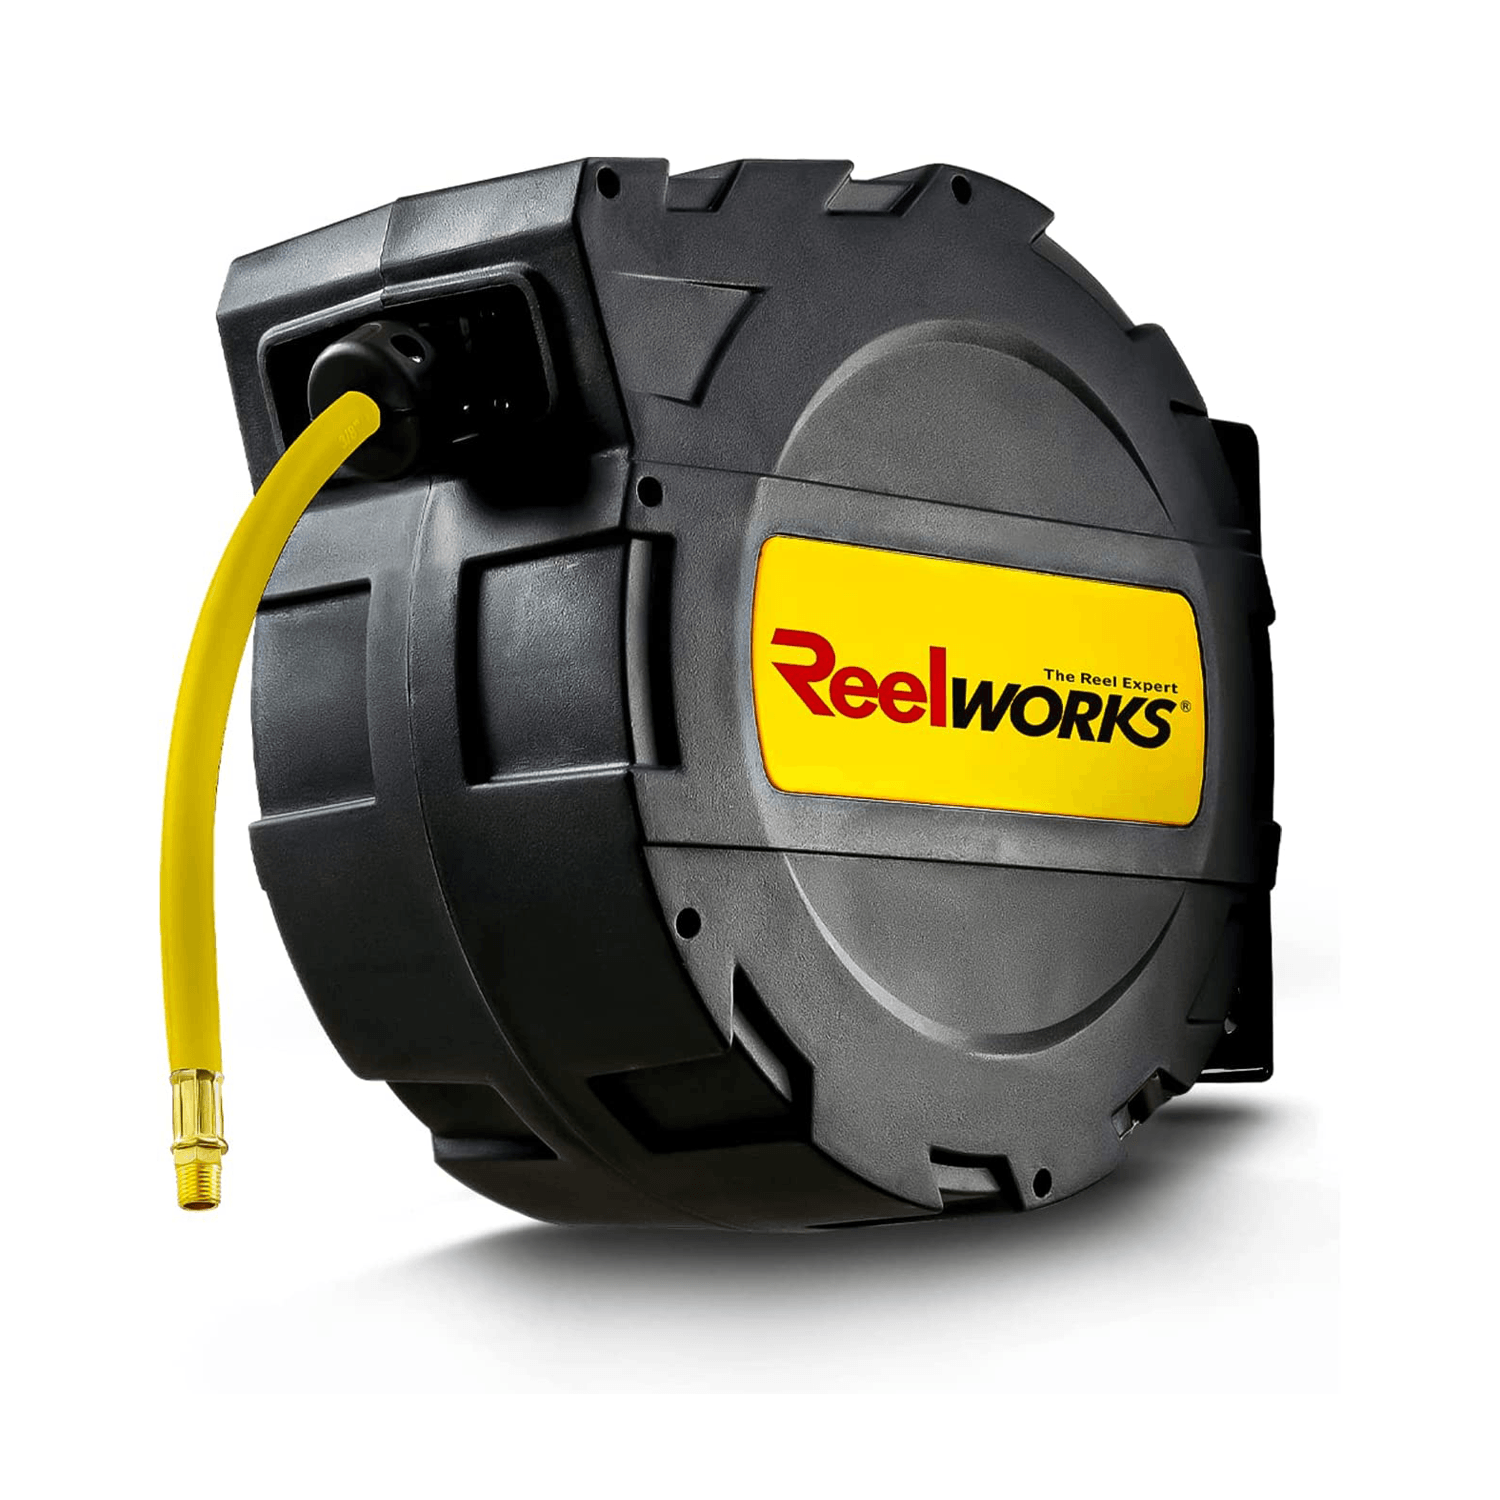 ReelWorks Mountable Retractable Air Hose Reel - 3/8 x 50'FT, 3' Ft Le